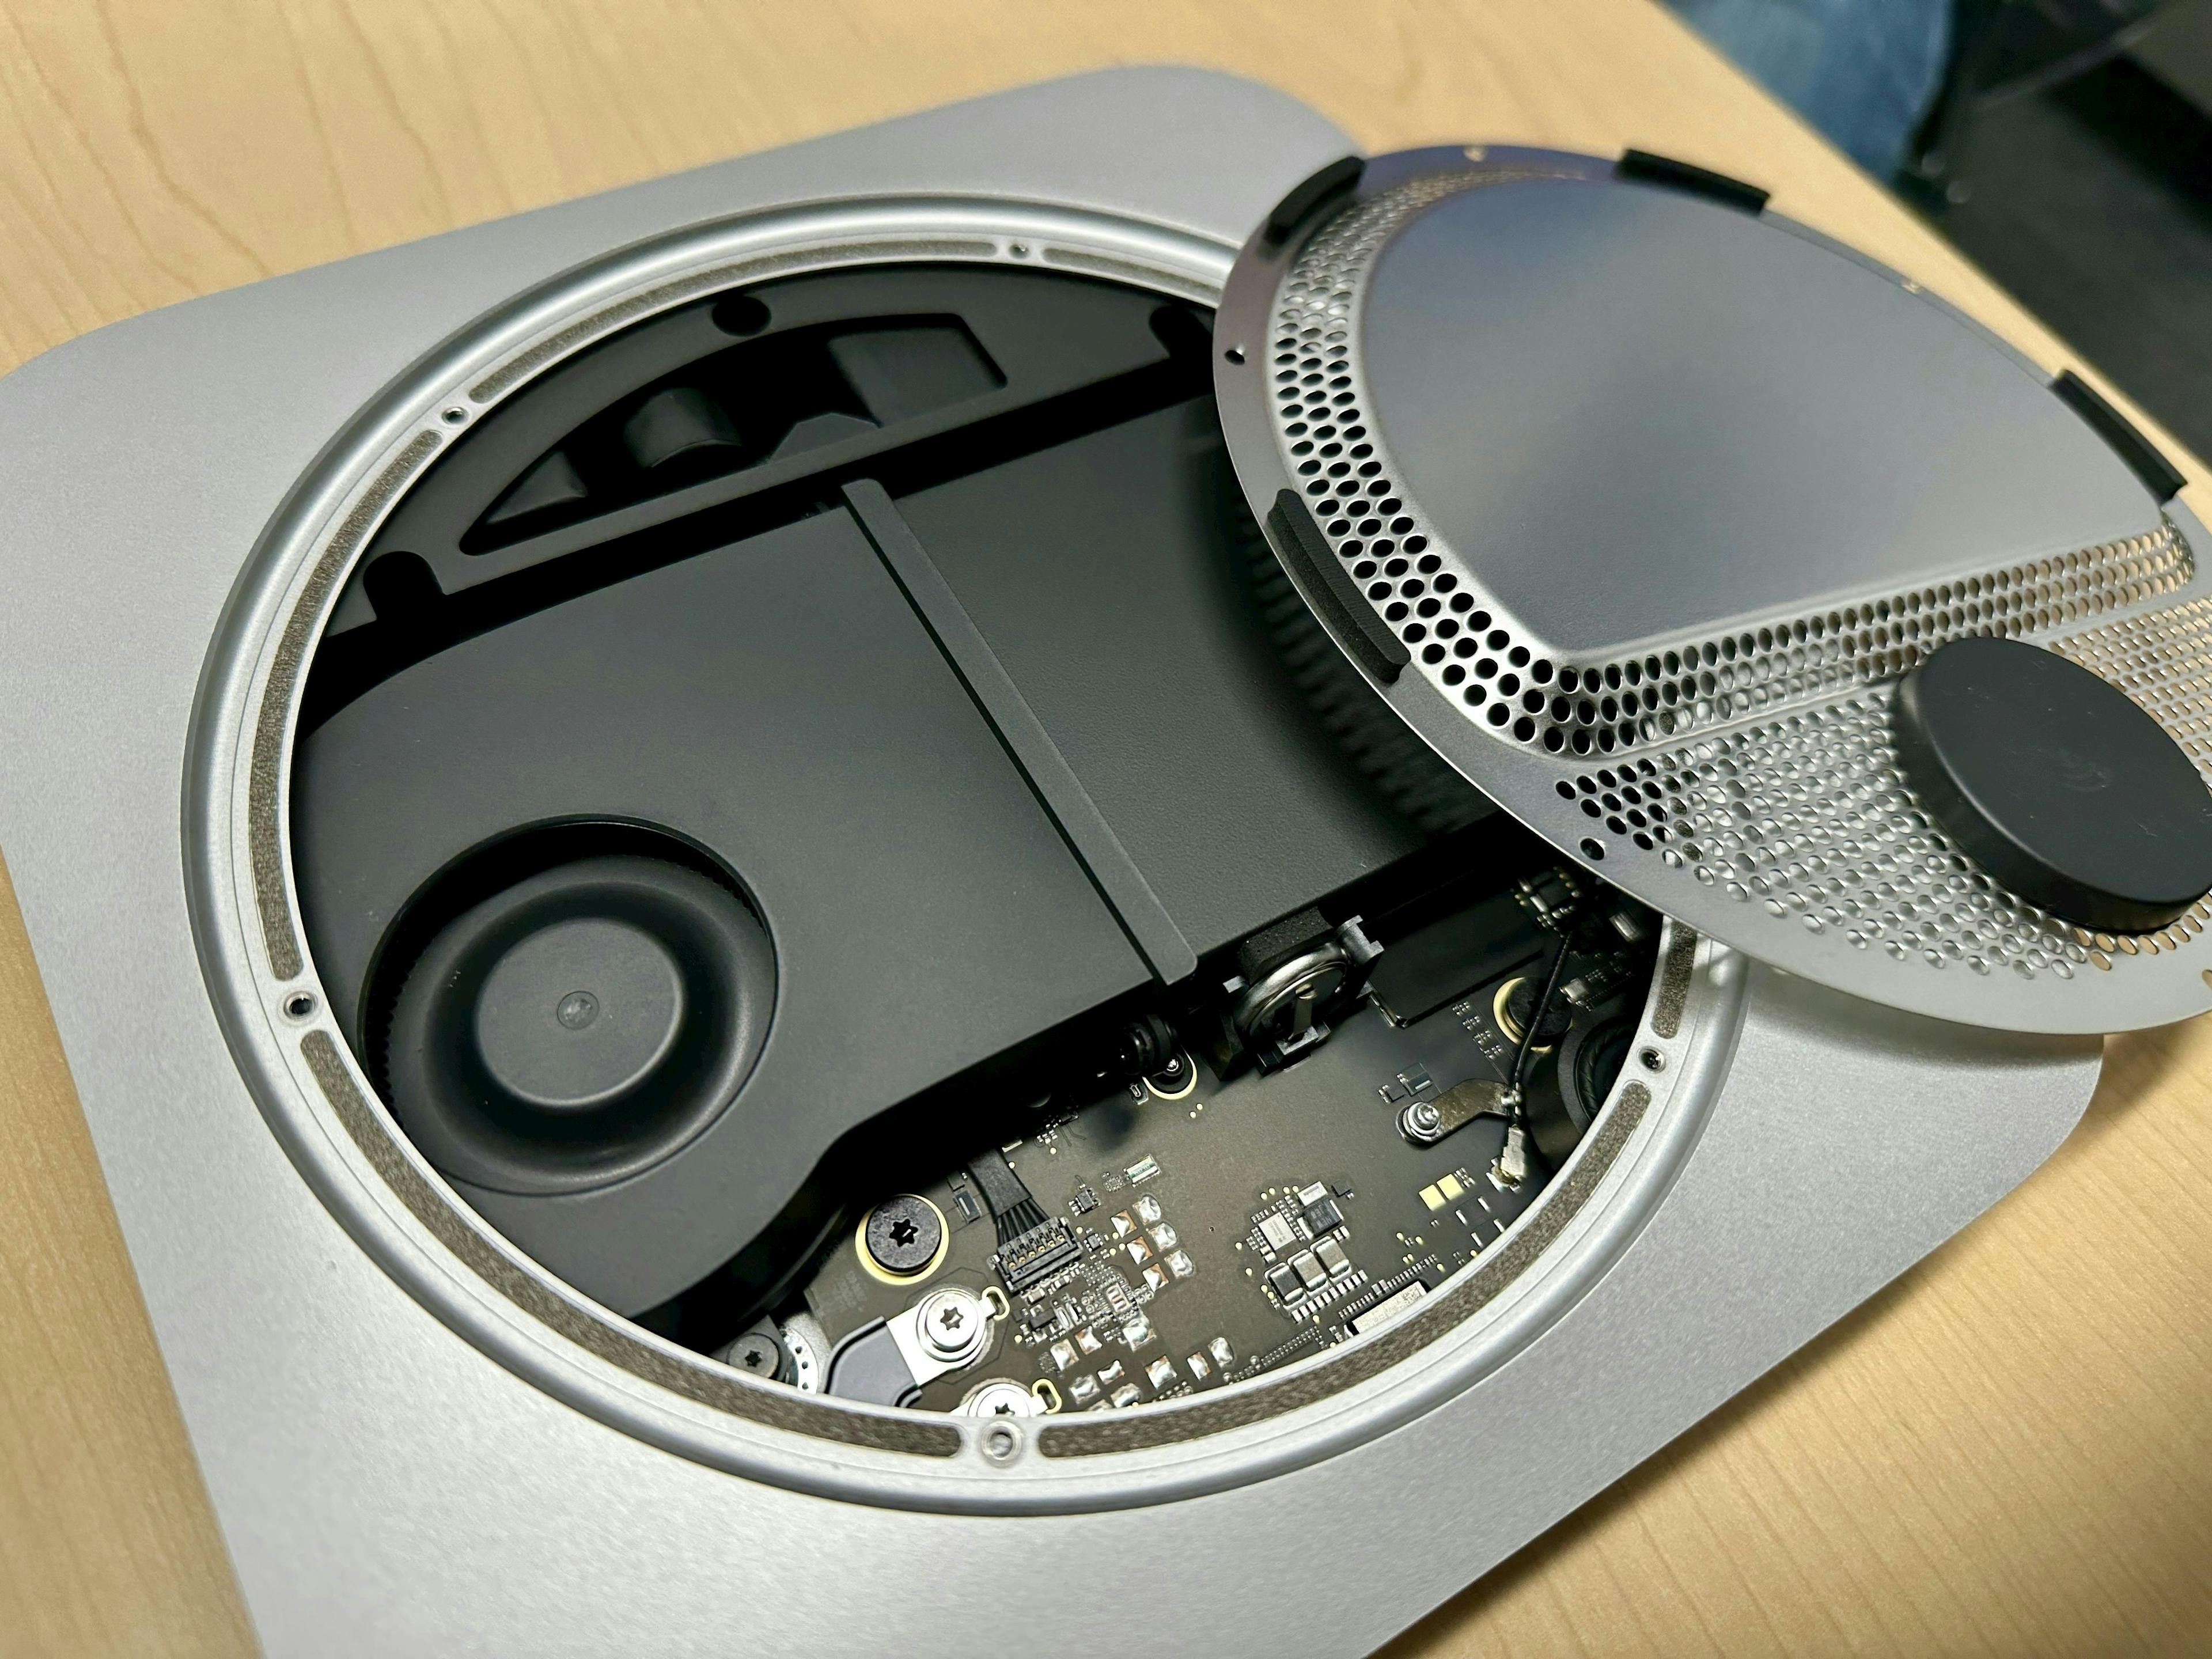 Image showing the antenna plate on the Mac mini M2 Pro.